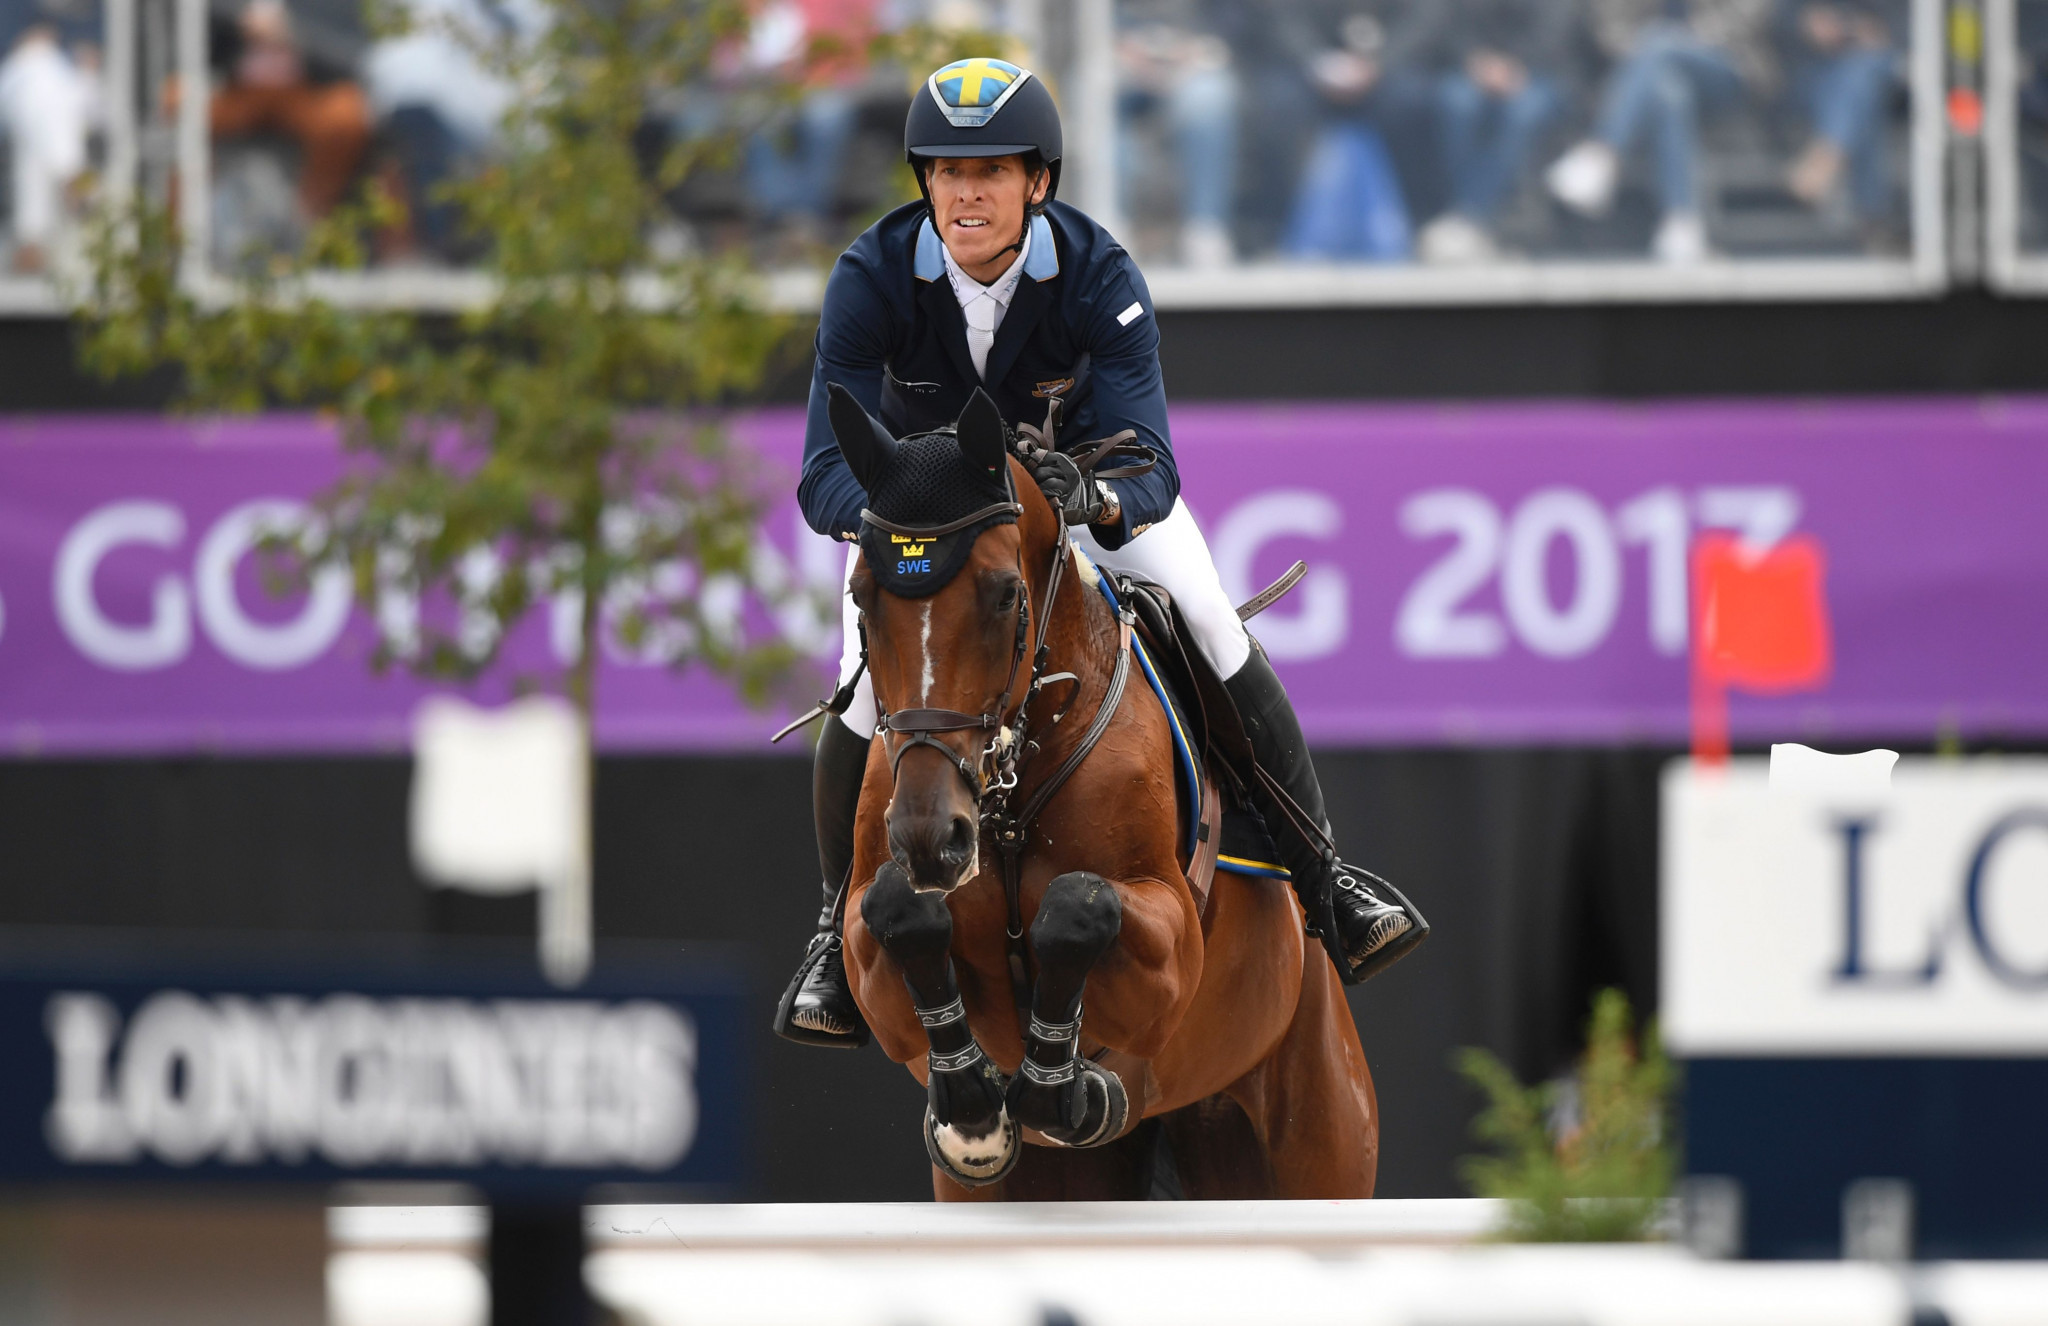 Sweden's Henrik von Eckermann, on Mary Lou, was runner-up at Lyon but will be heading the Western European League in Stuttgart in a fortnight  ©Getty Images